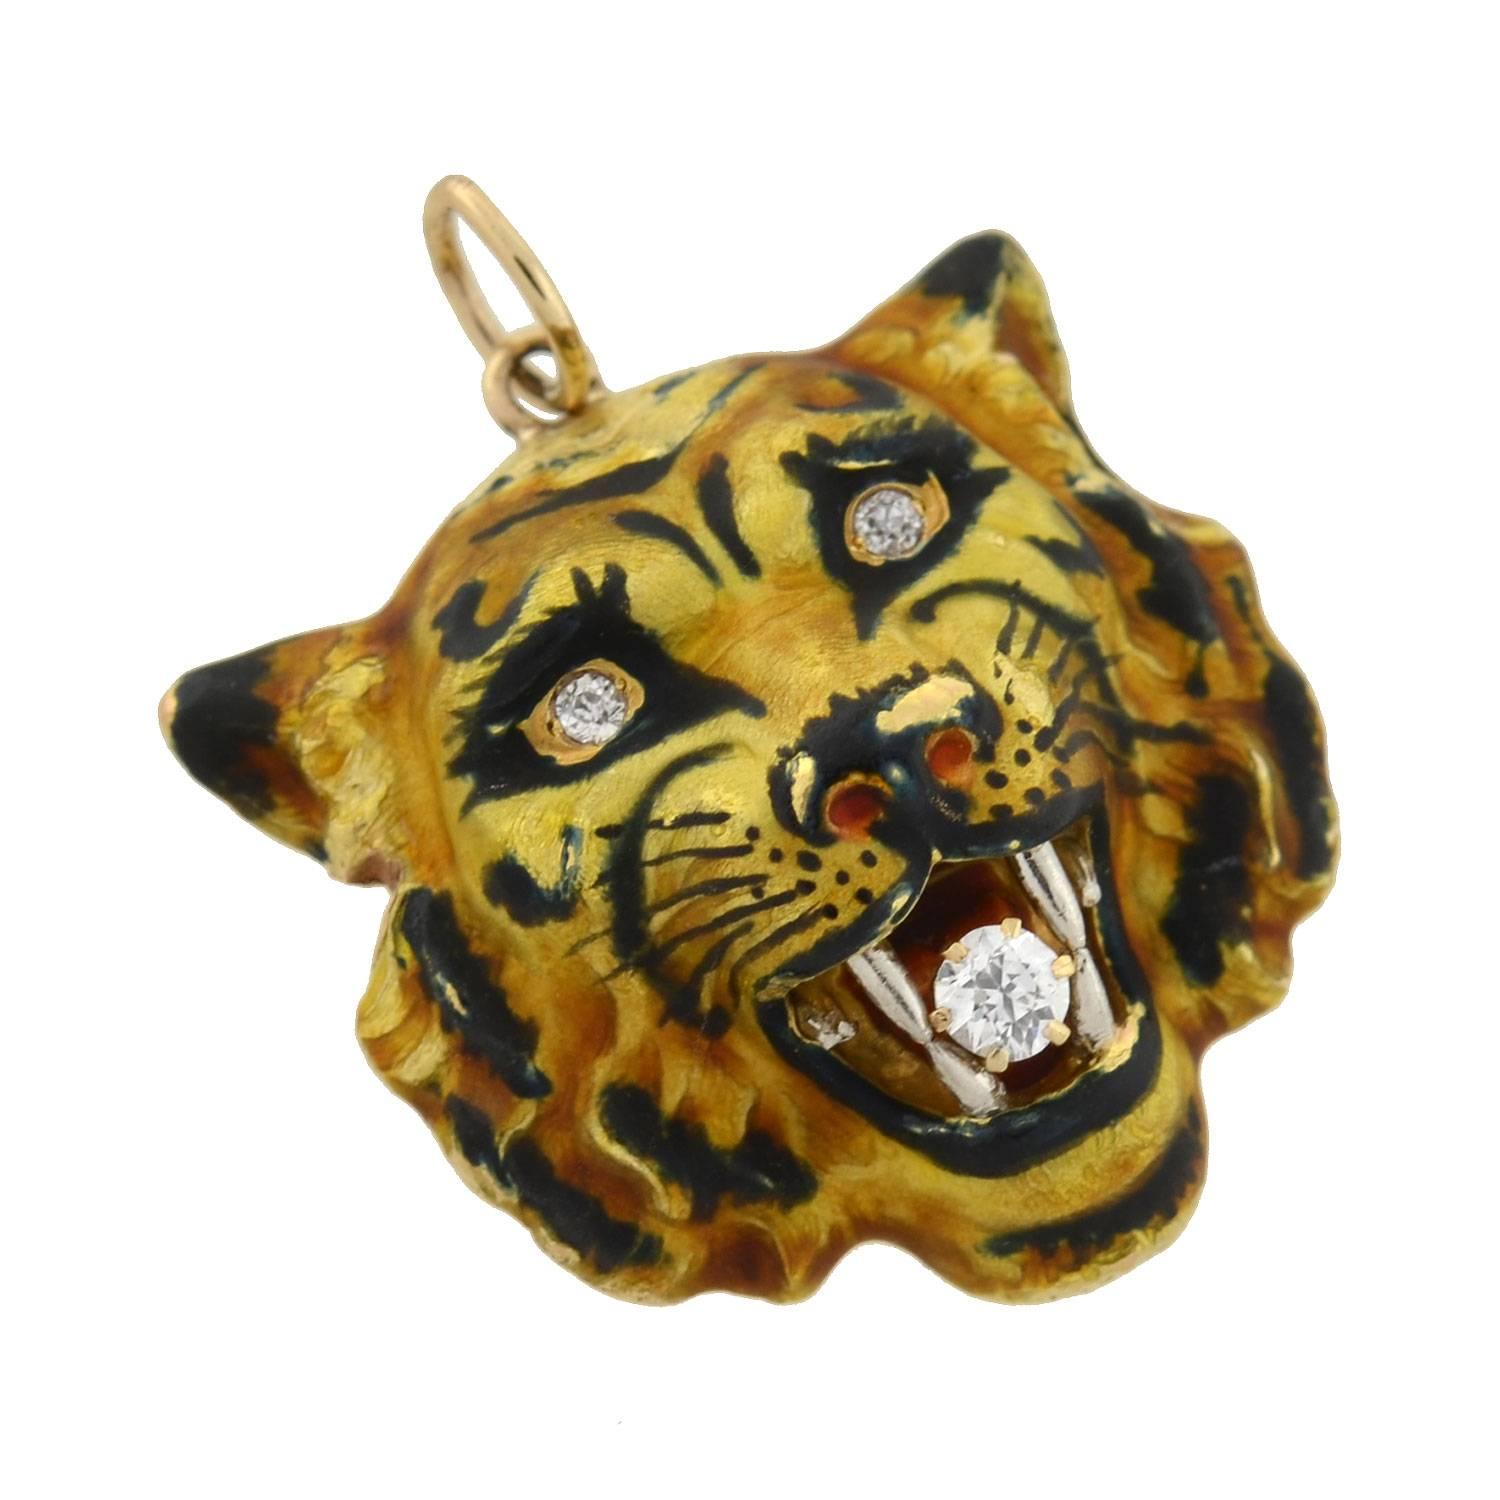 A magnificent enameled pendant from the Victorian (ca1880) era! Crafted in vibrant 14kt gold, the piece represents the 3-dimensional repousse face of a fierce, snarling tiger. Luscious hand-painted enamel accents cover the surface, creating an